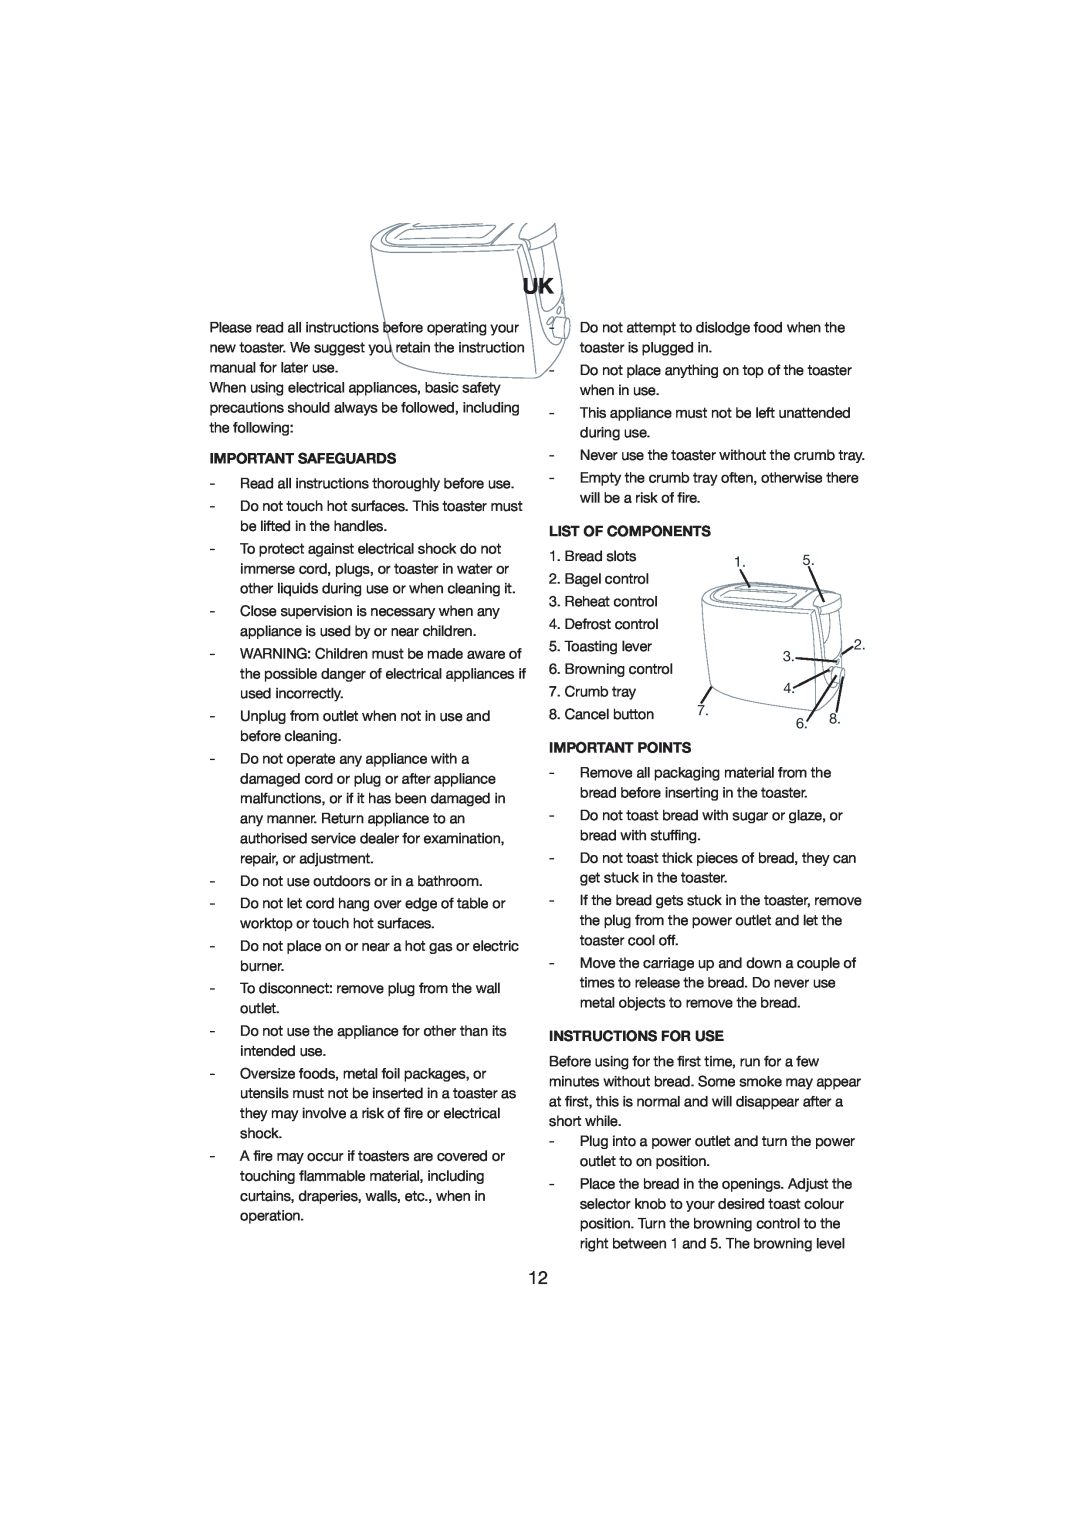 Melissa 243-011 manual Important Safeguards, List Of Components, Important Points, Instructions For Use 